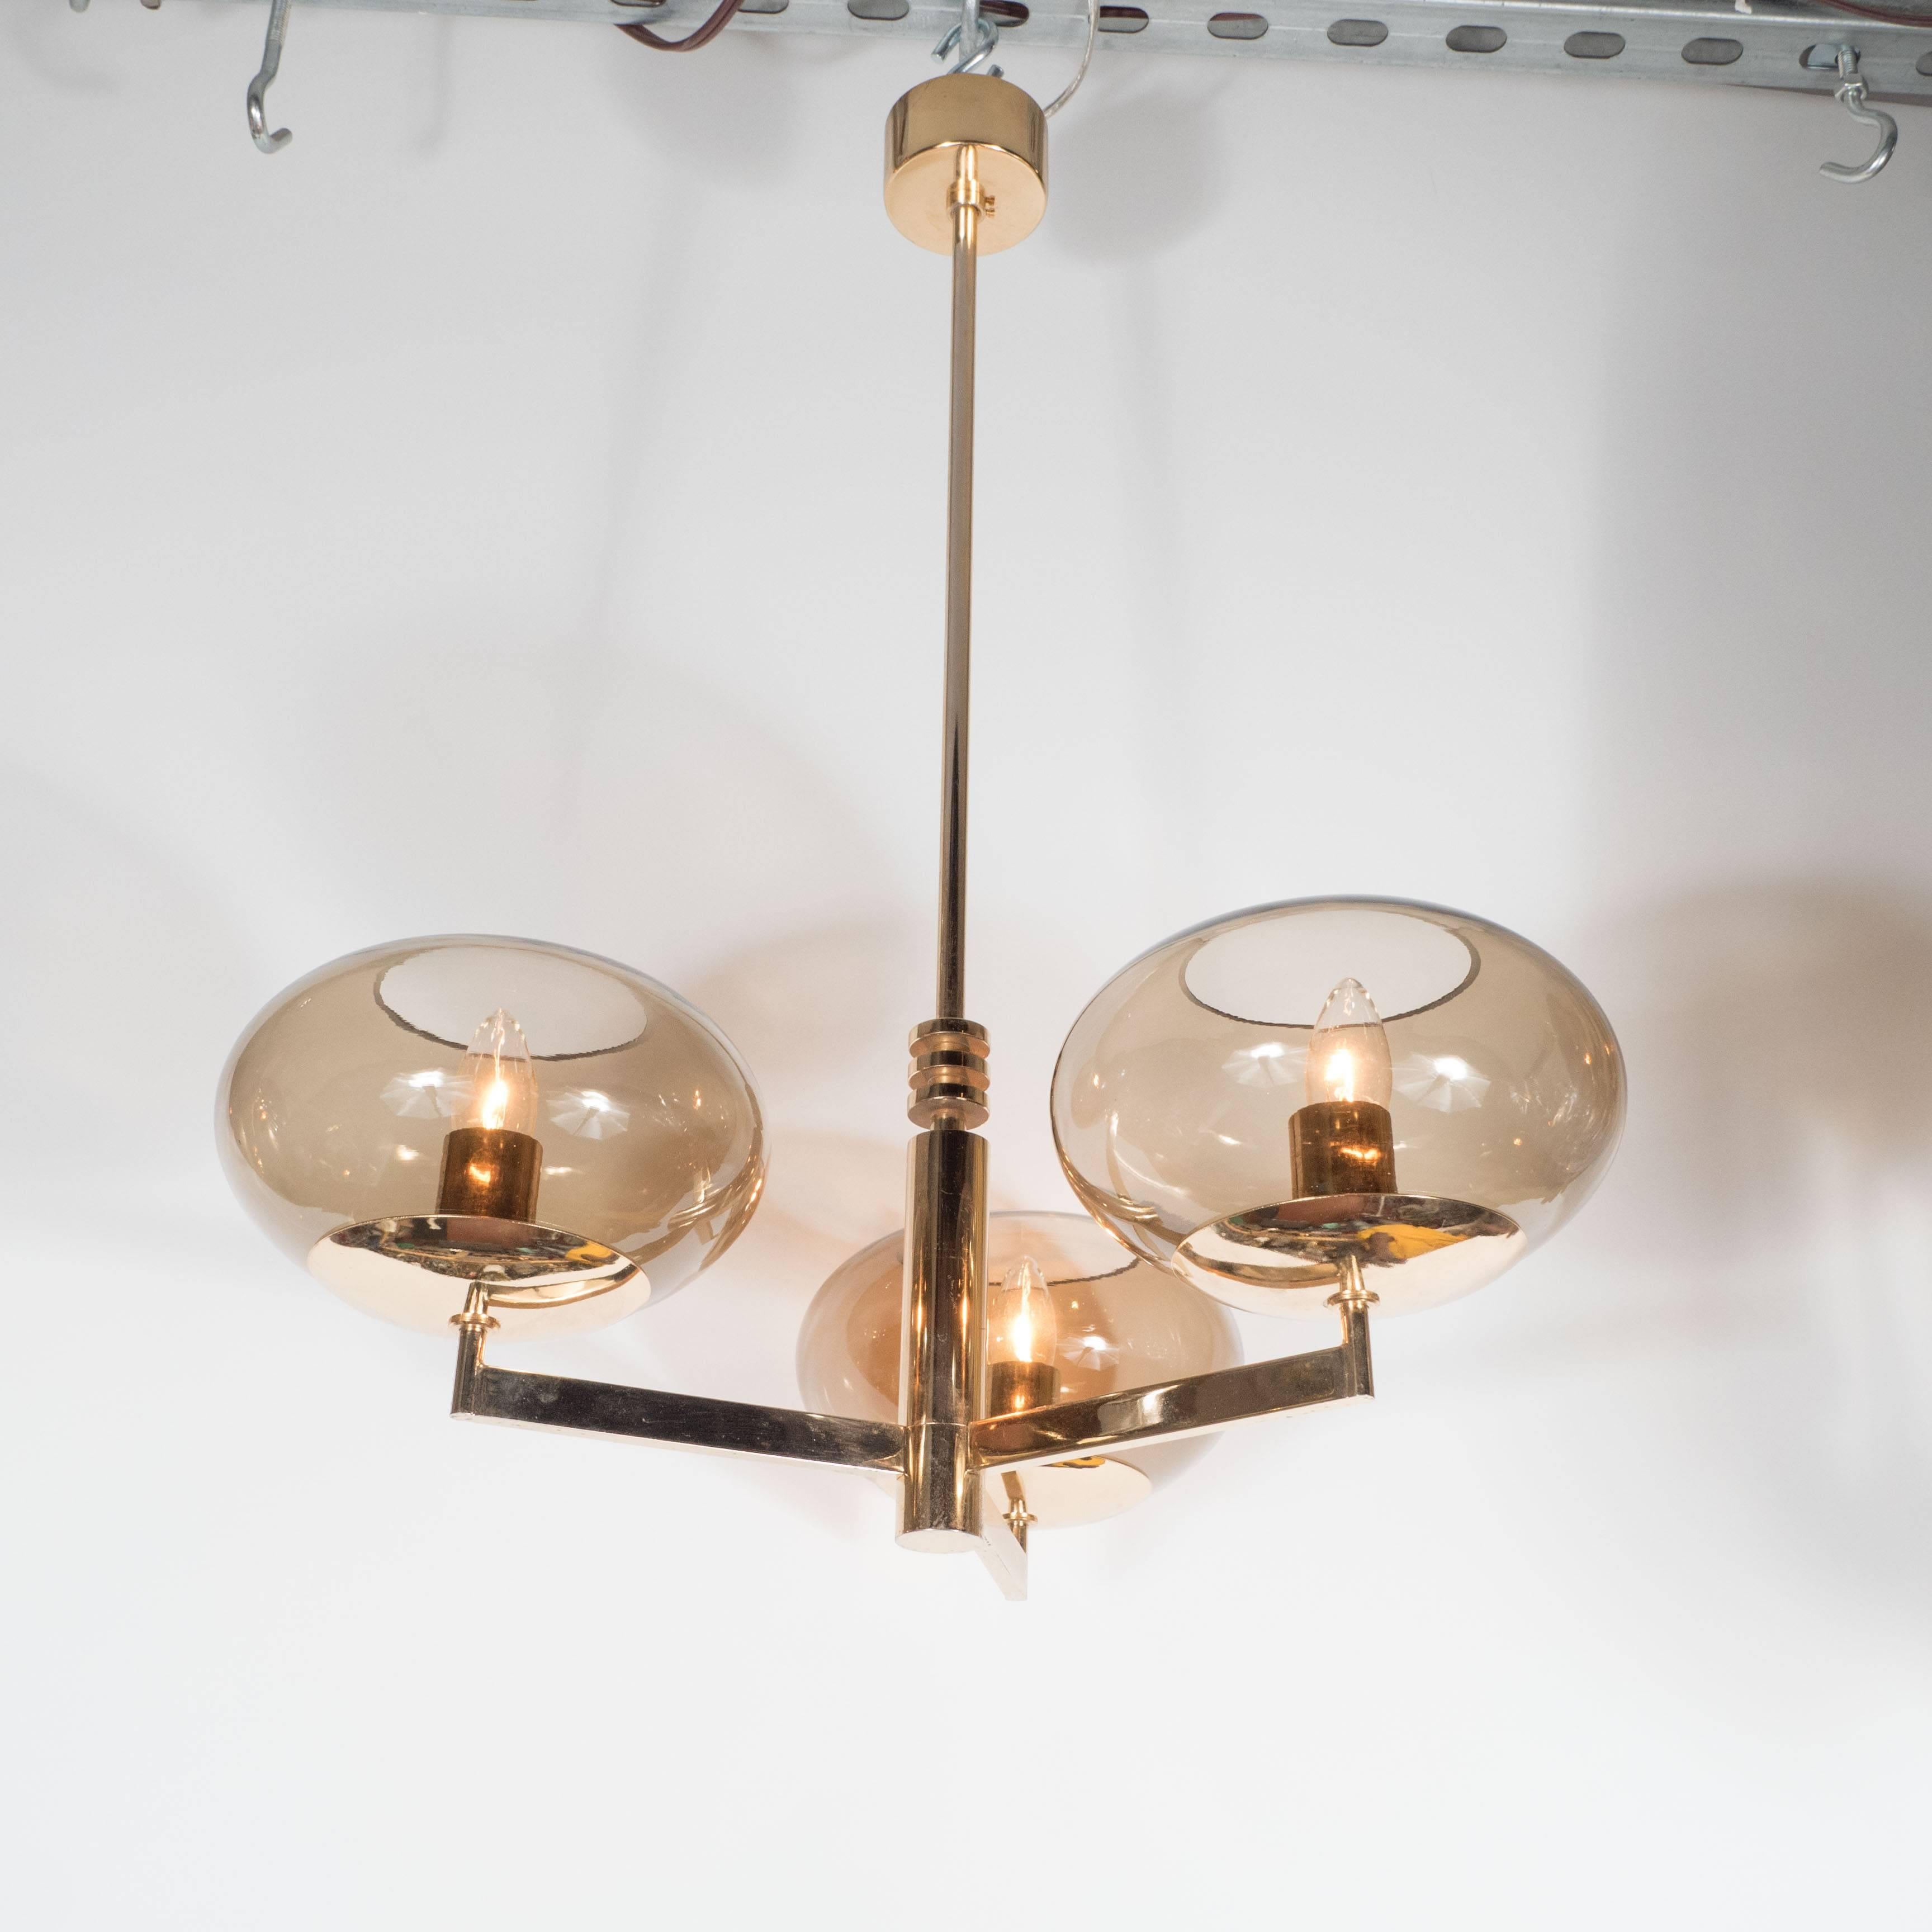 An Italian Mid-Century smoked glass and polished brass three-arm chandelier by Gaetano Sciolari. A brass central rod with disk detailing supports three arms, each fitted with an open smoked glass shade and standard candelabra socket, each capable of